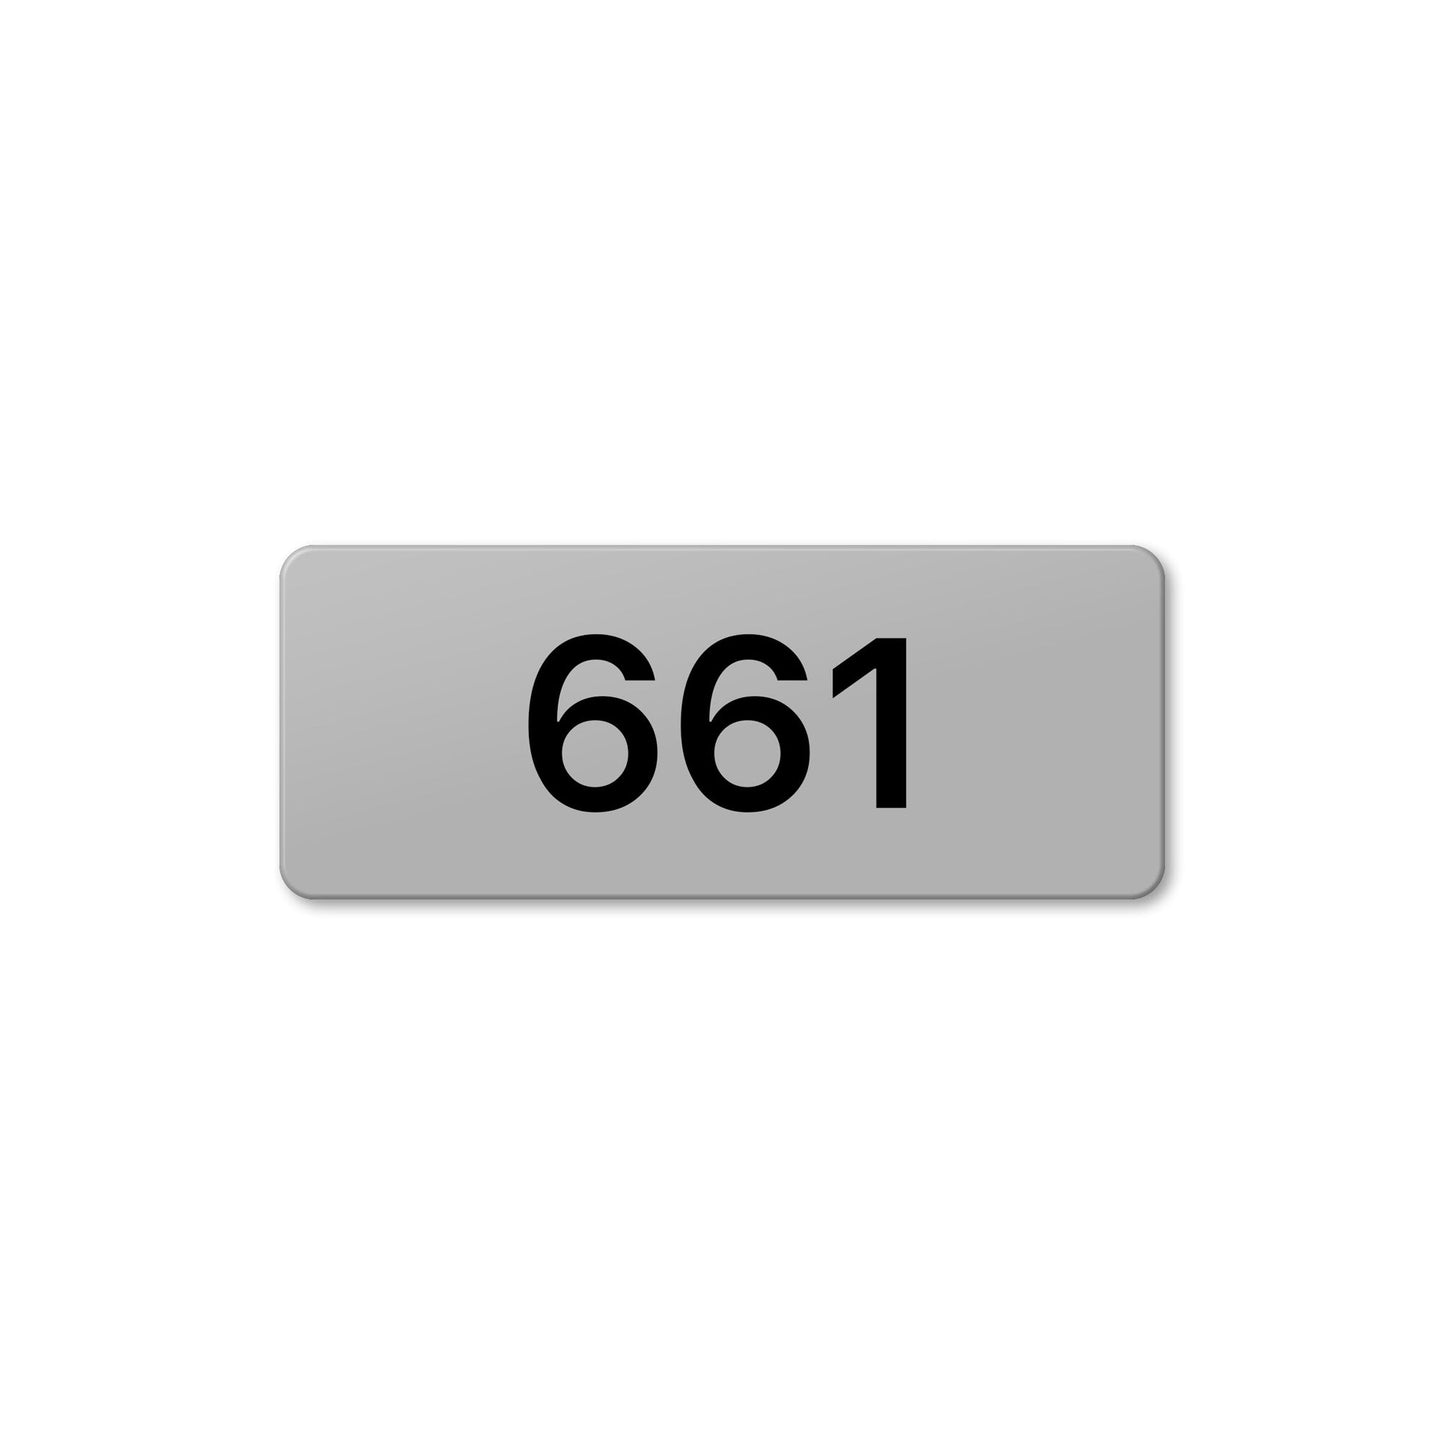 Numeral 661